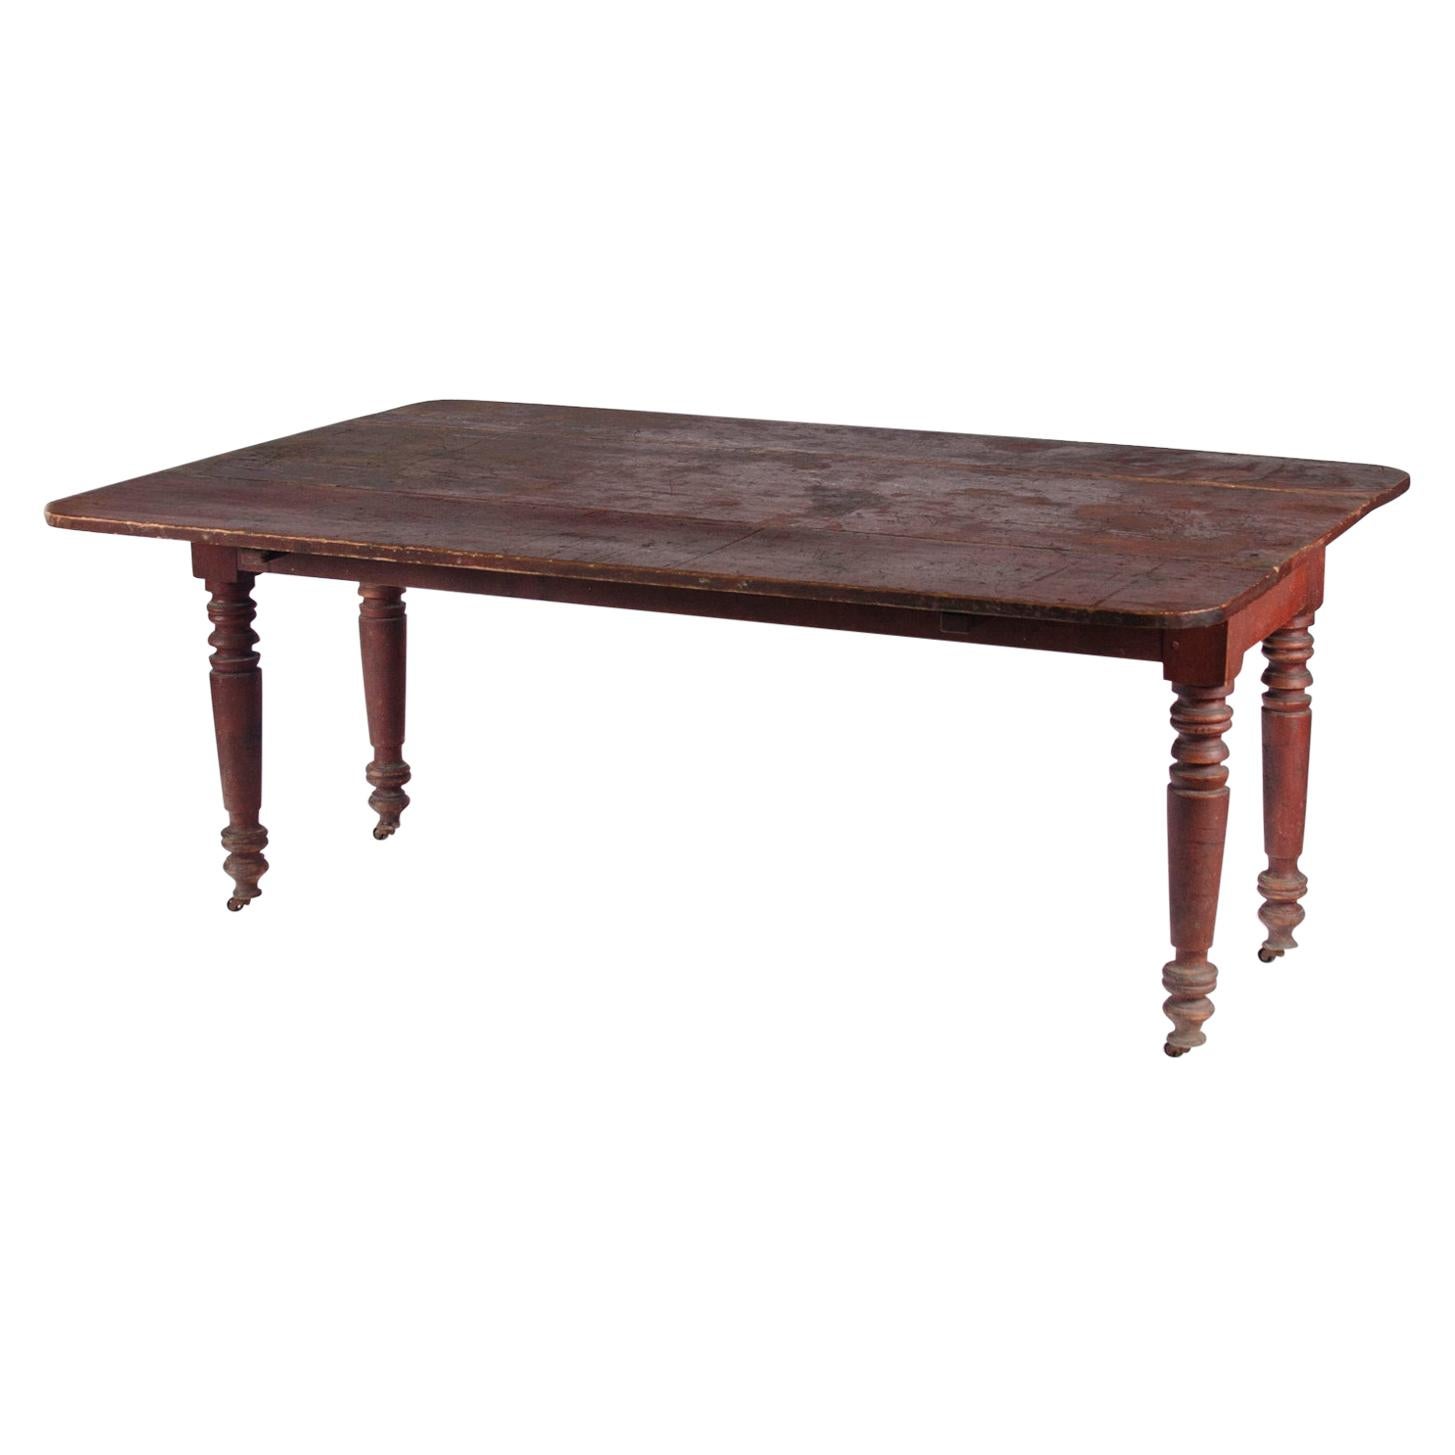 Red Painted American Drop-Leaf Farm Table, Impressive Scale, New York, 1830-1860